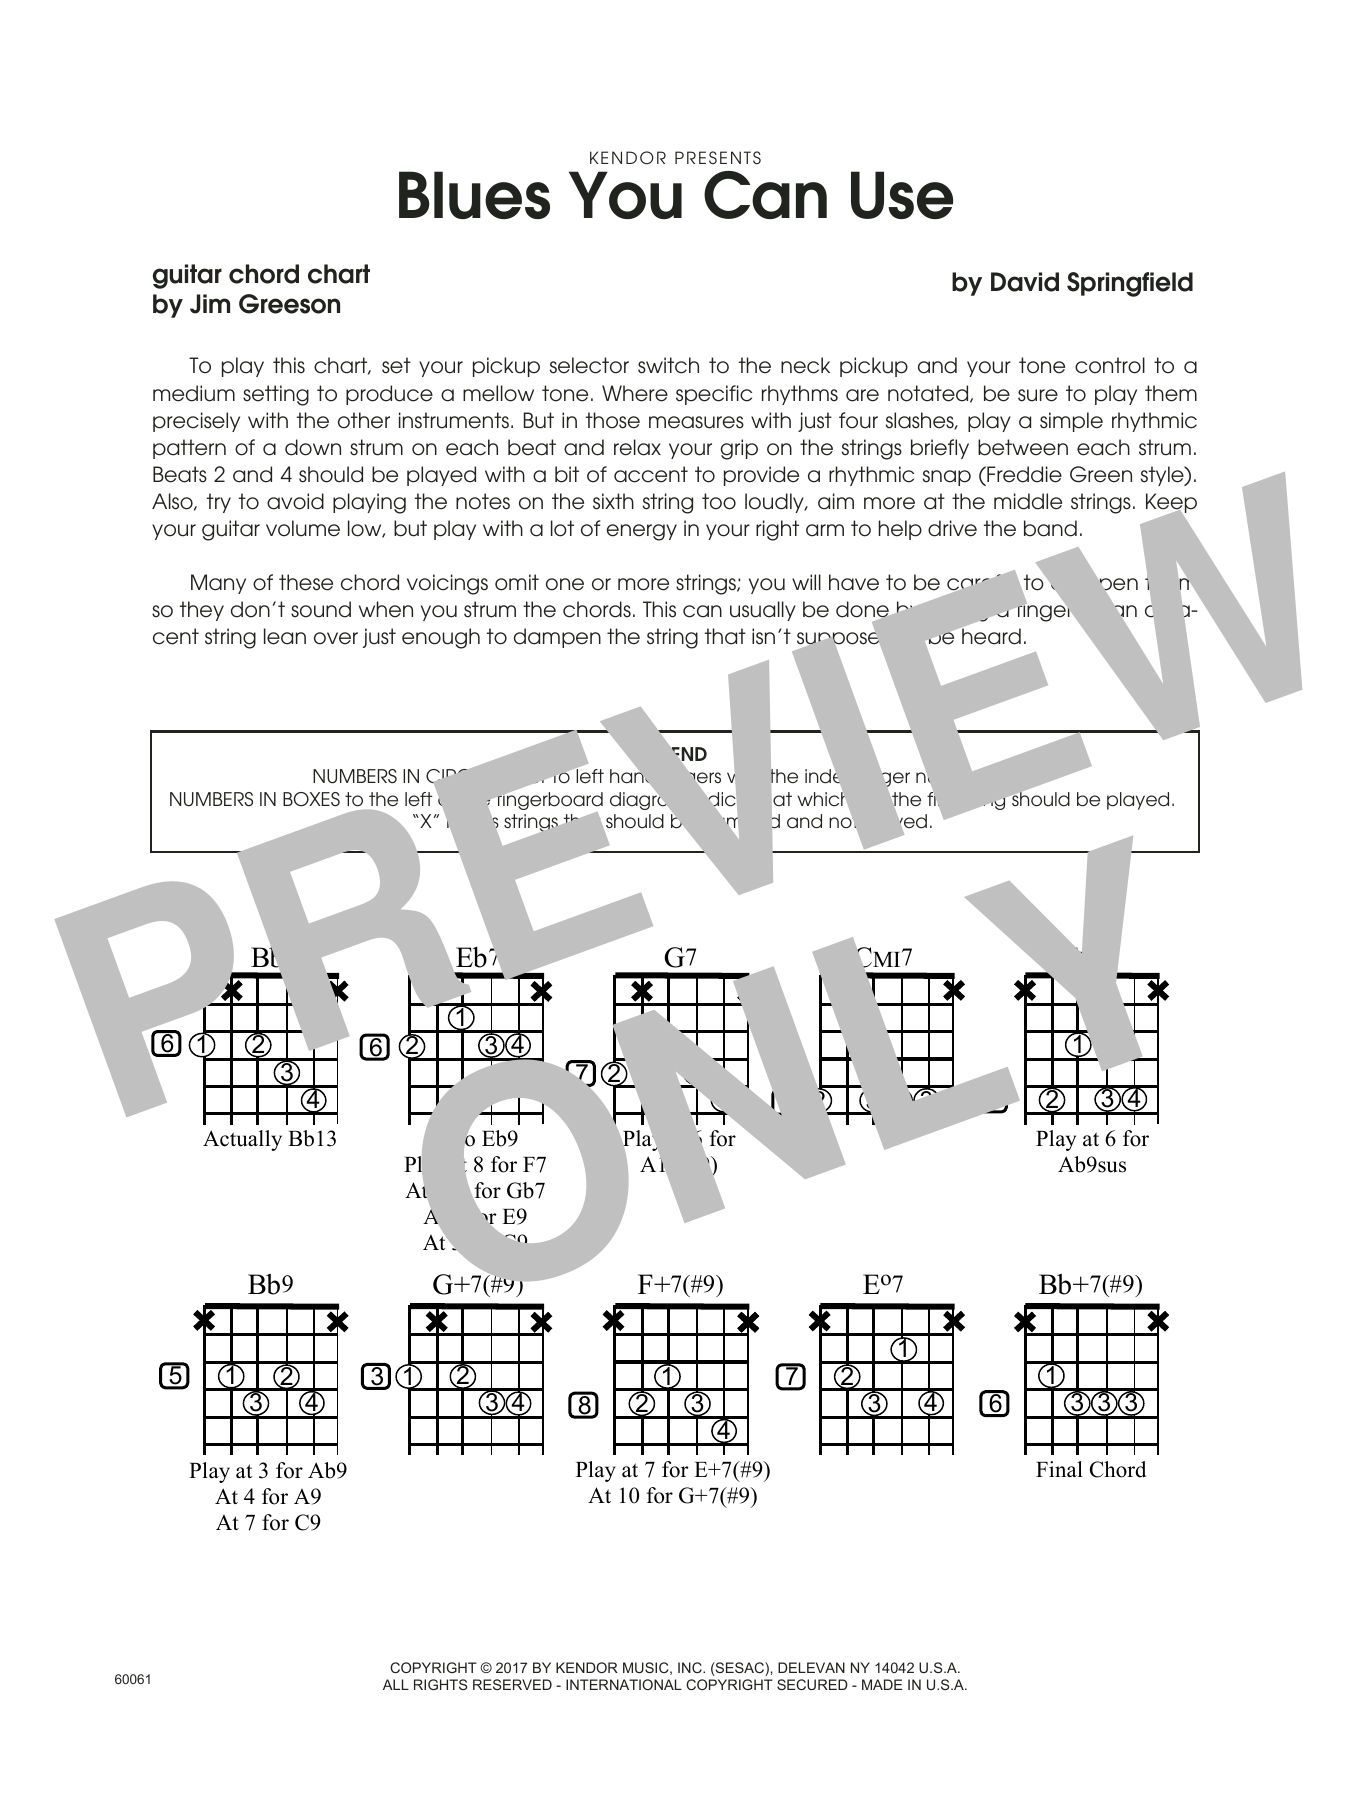 Download David Springfield Blues You Can Use - Guitar Chord Chart sheet music and printable PDF score & Jazz music notes